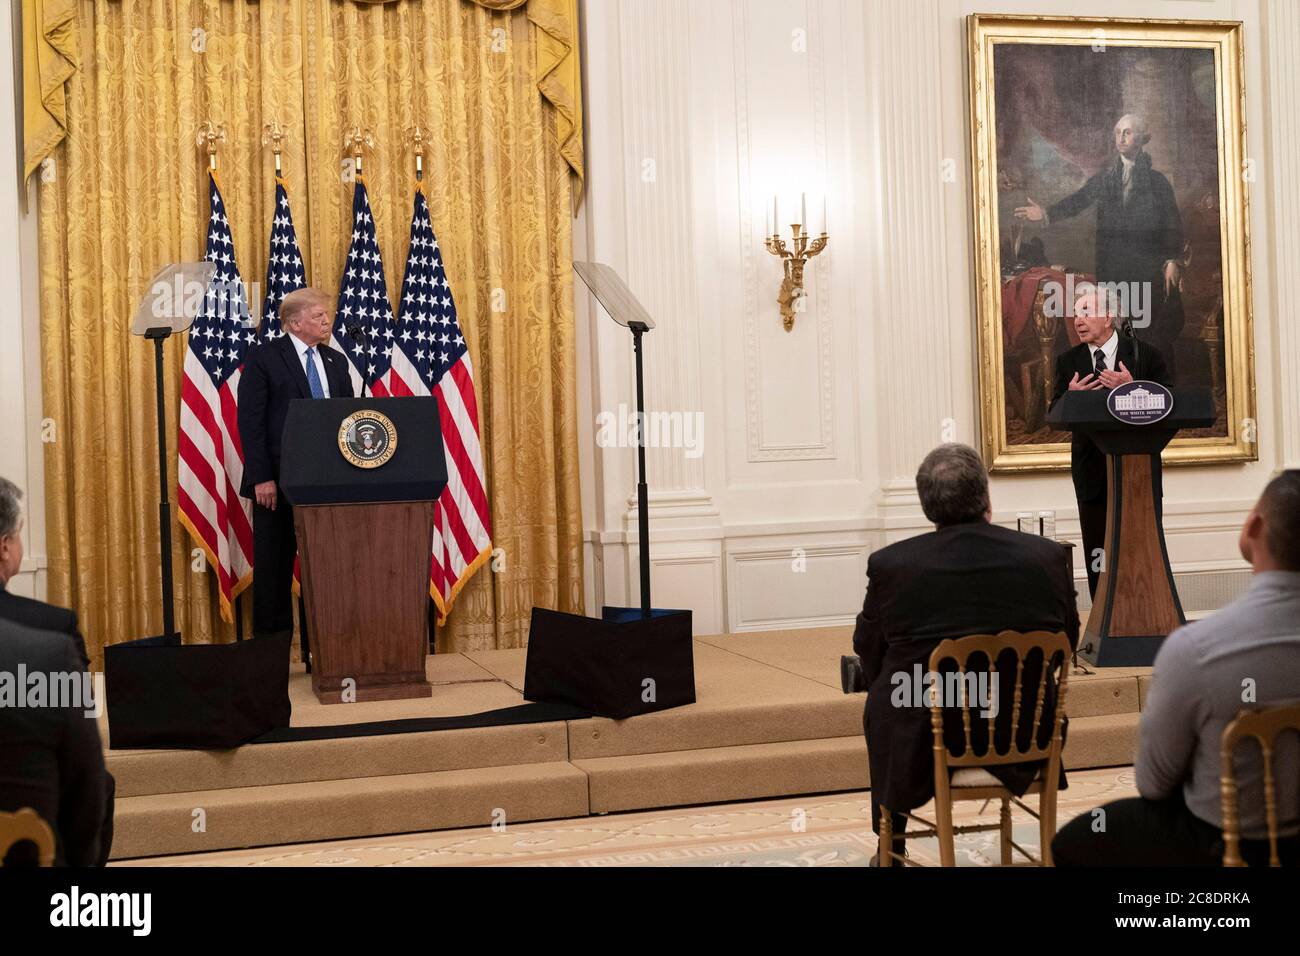 Washington, United States Of America. 22nd July, 2020. Washington, United States of America. 22 July, 2020. U.S. President Donald Trump listens as Sam Vigil talks about the murder of his wife during the announcement of Operation Legend, to combat violent crime in the East Room of the White House July 22, 2020 in Washington, DC Trump plans to send federal law enforcement to cities around the country in what is widely viewed as an attempt to suppress Black Lives Matter protests. Credit: Shealah Craighead/White House Photo/Alamy Live News Stock Photo